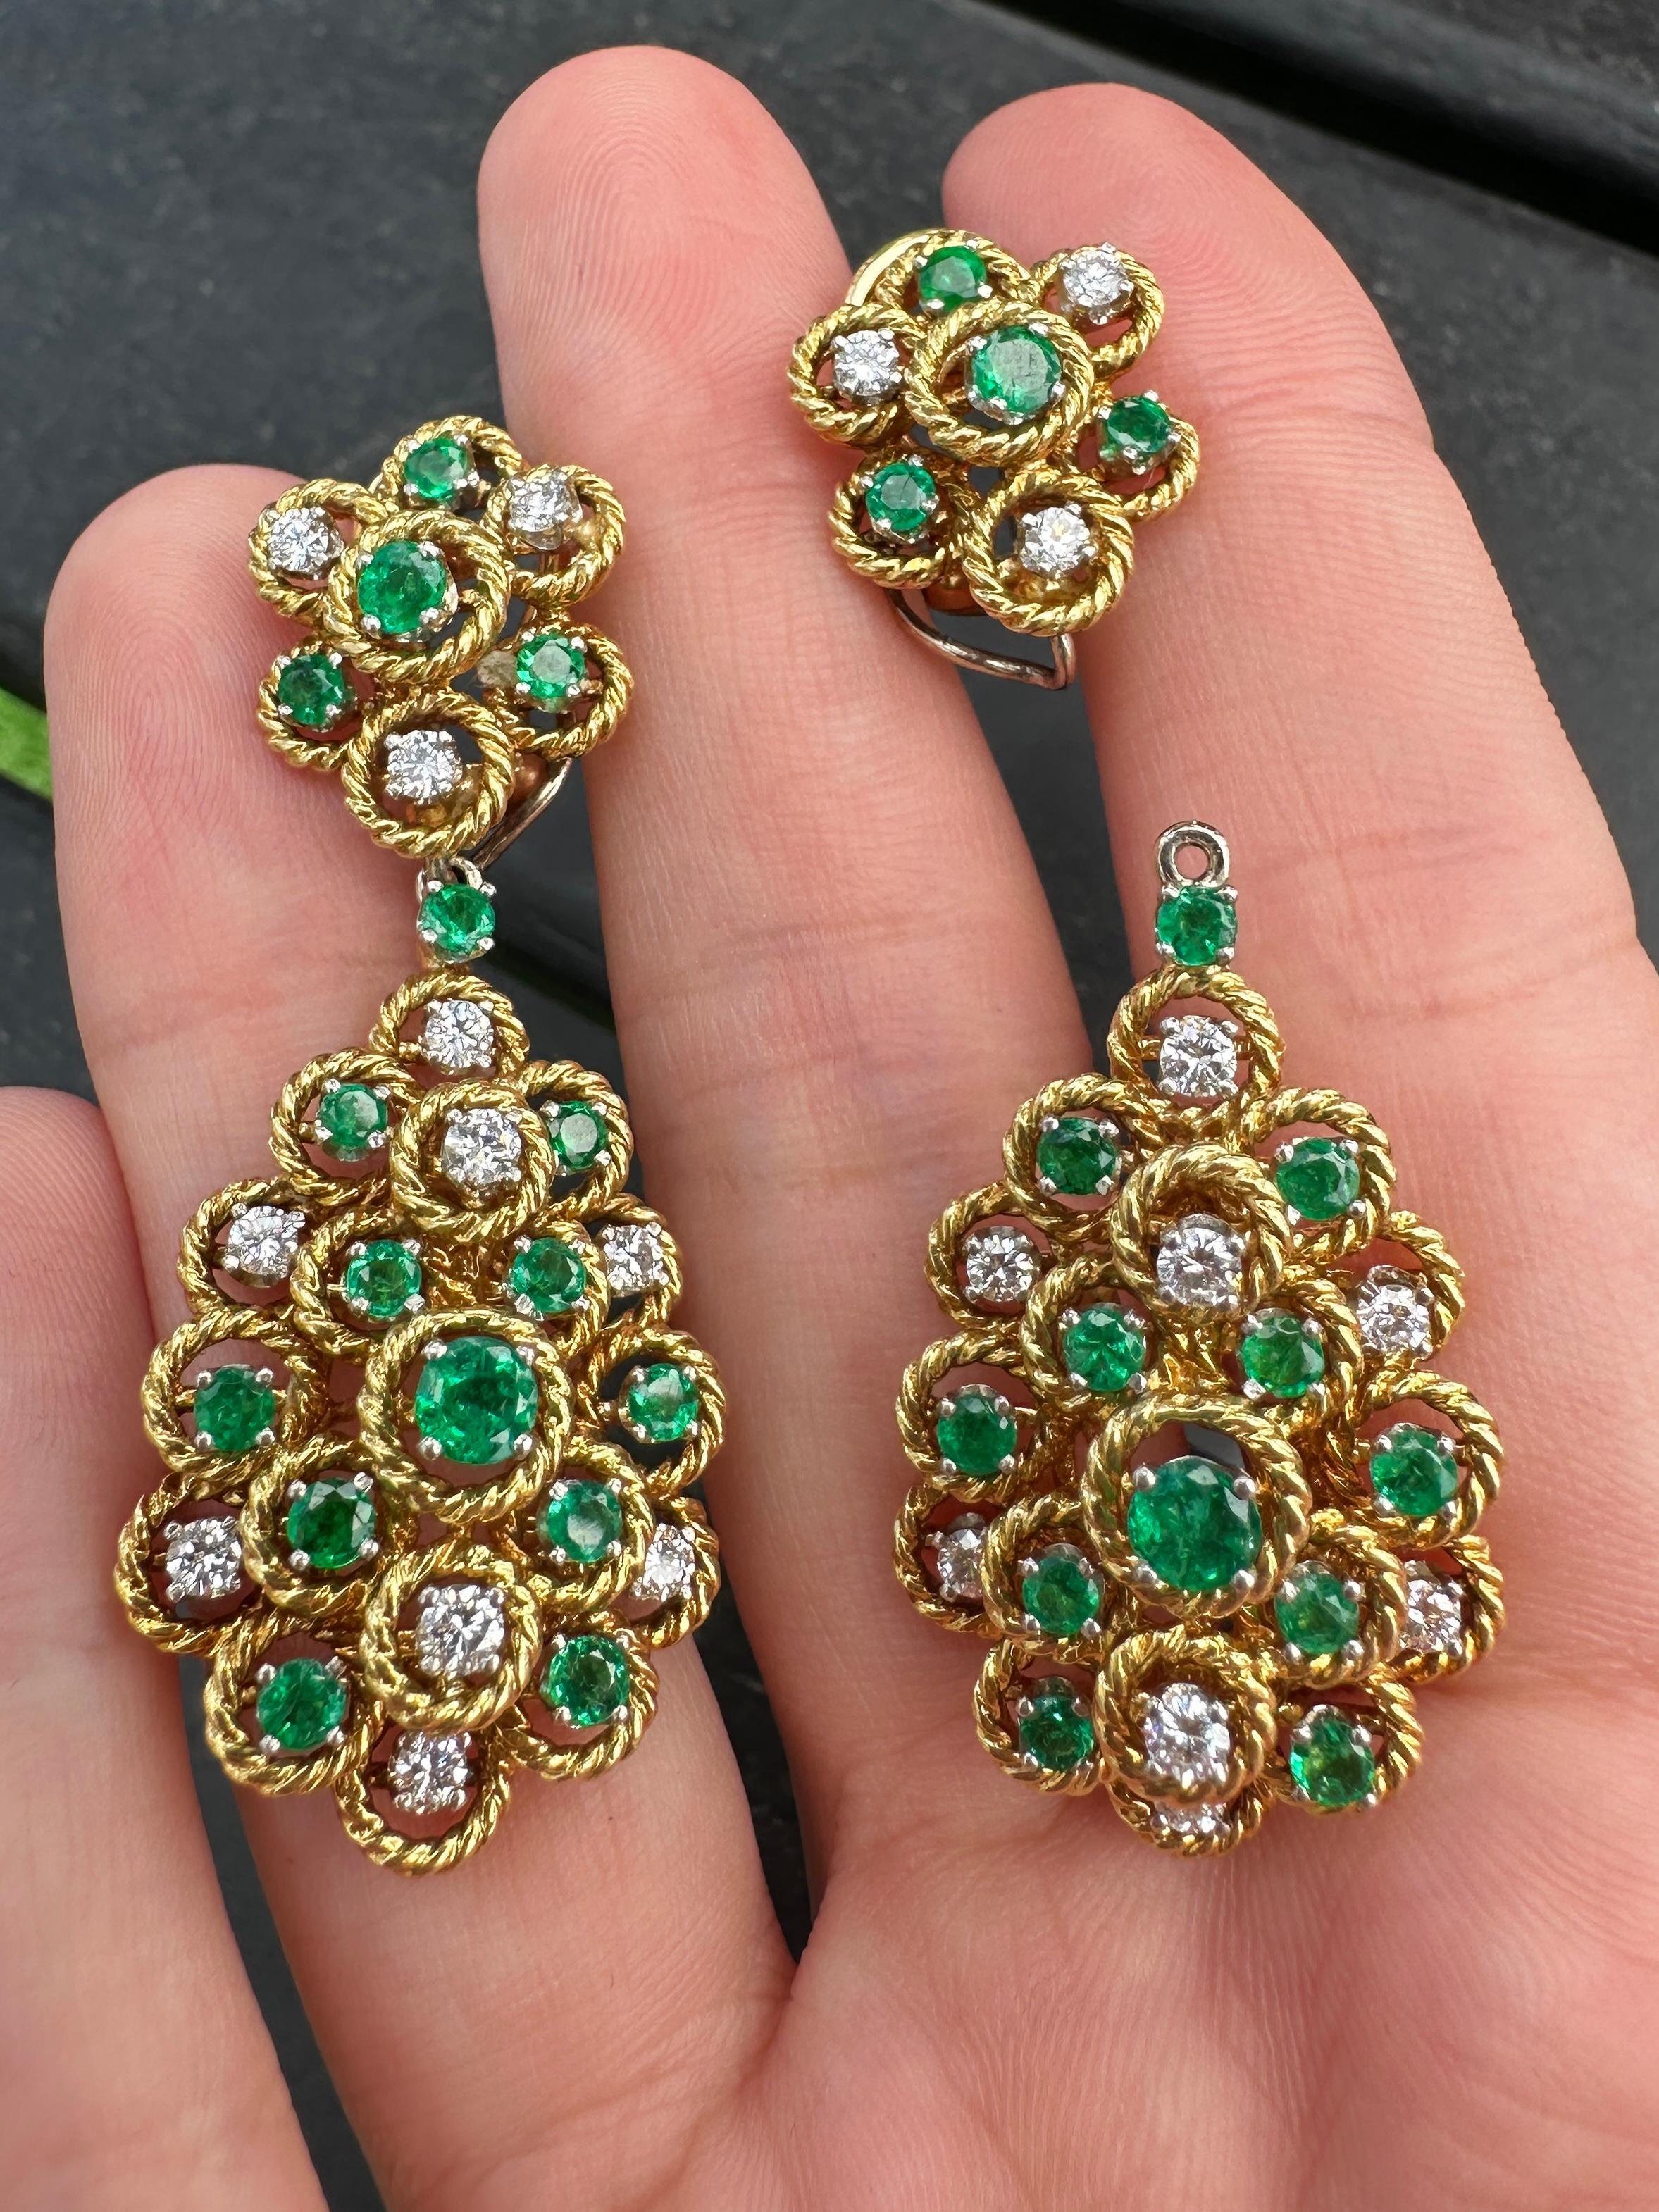 Elevate any ensemble with these stunning 18k Diamond & Emerald Day/Night Earrings. Crafted in 1960's, these earrings feature shimmering 1.00 carats of diamonds and vibrant 1.50 carats of emeralds. Made of 18k yellow gold, these 2 inch x 0.75 inch